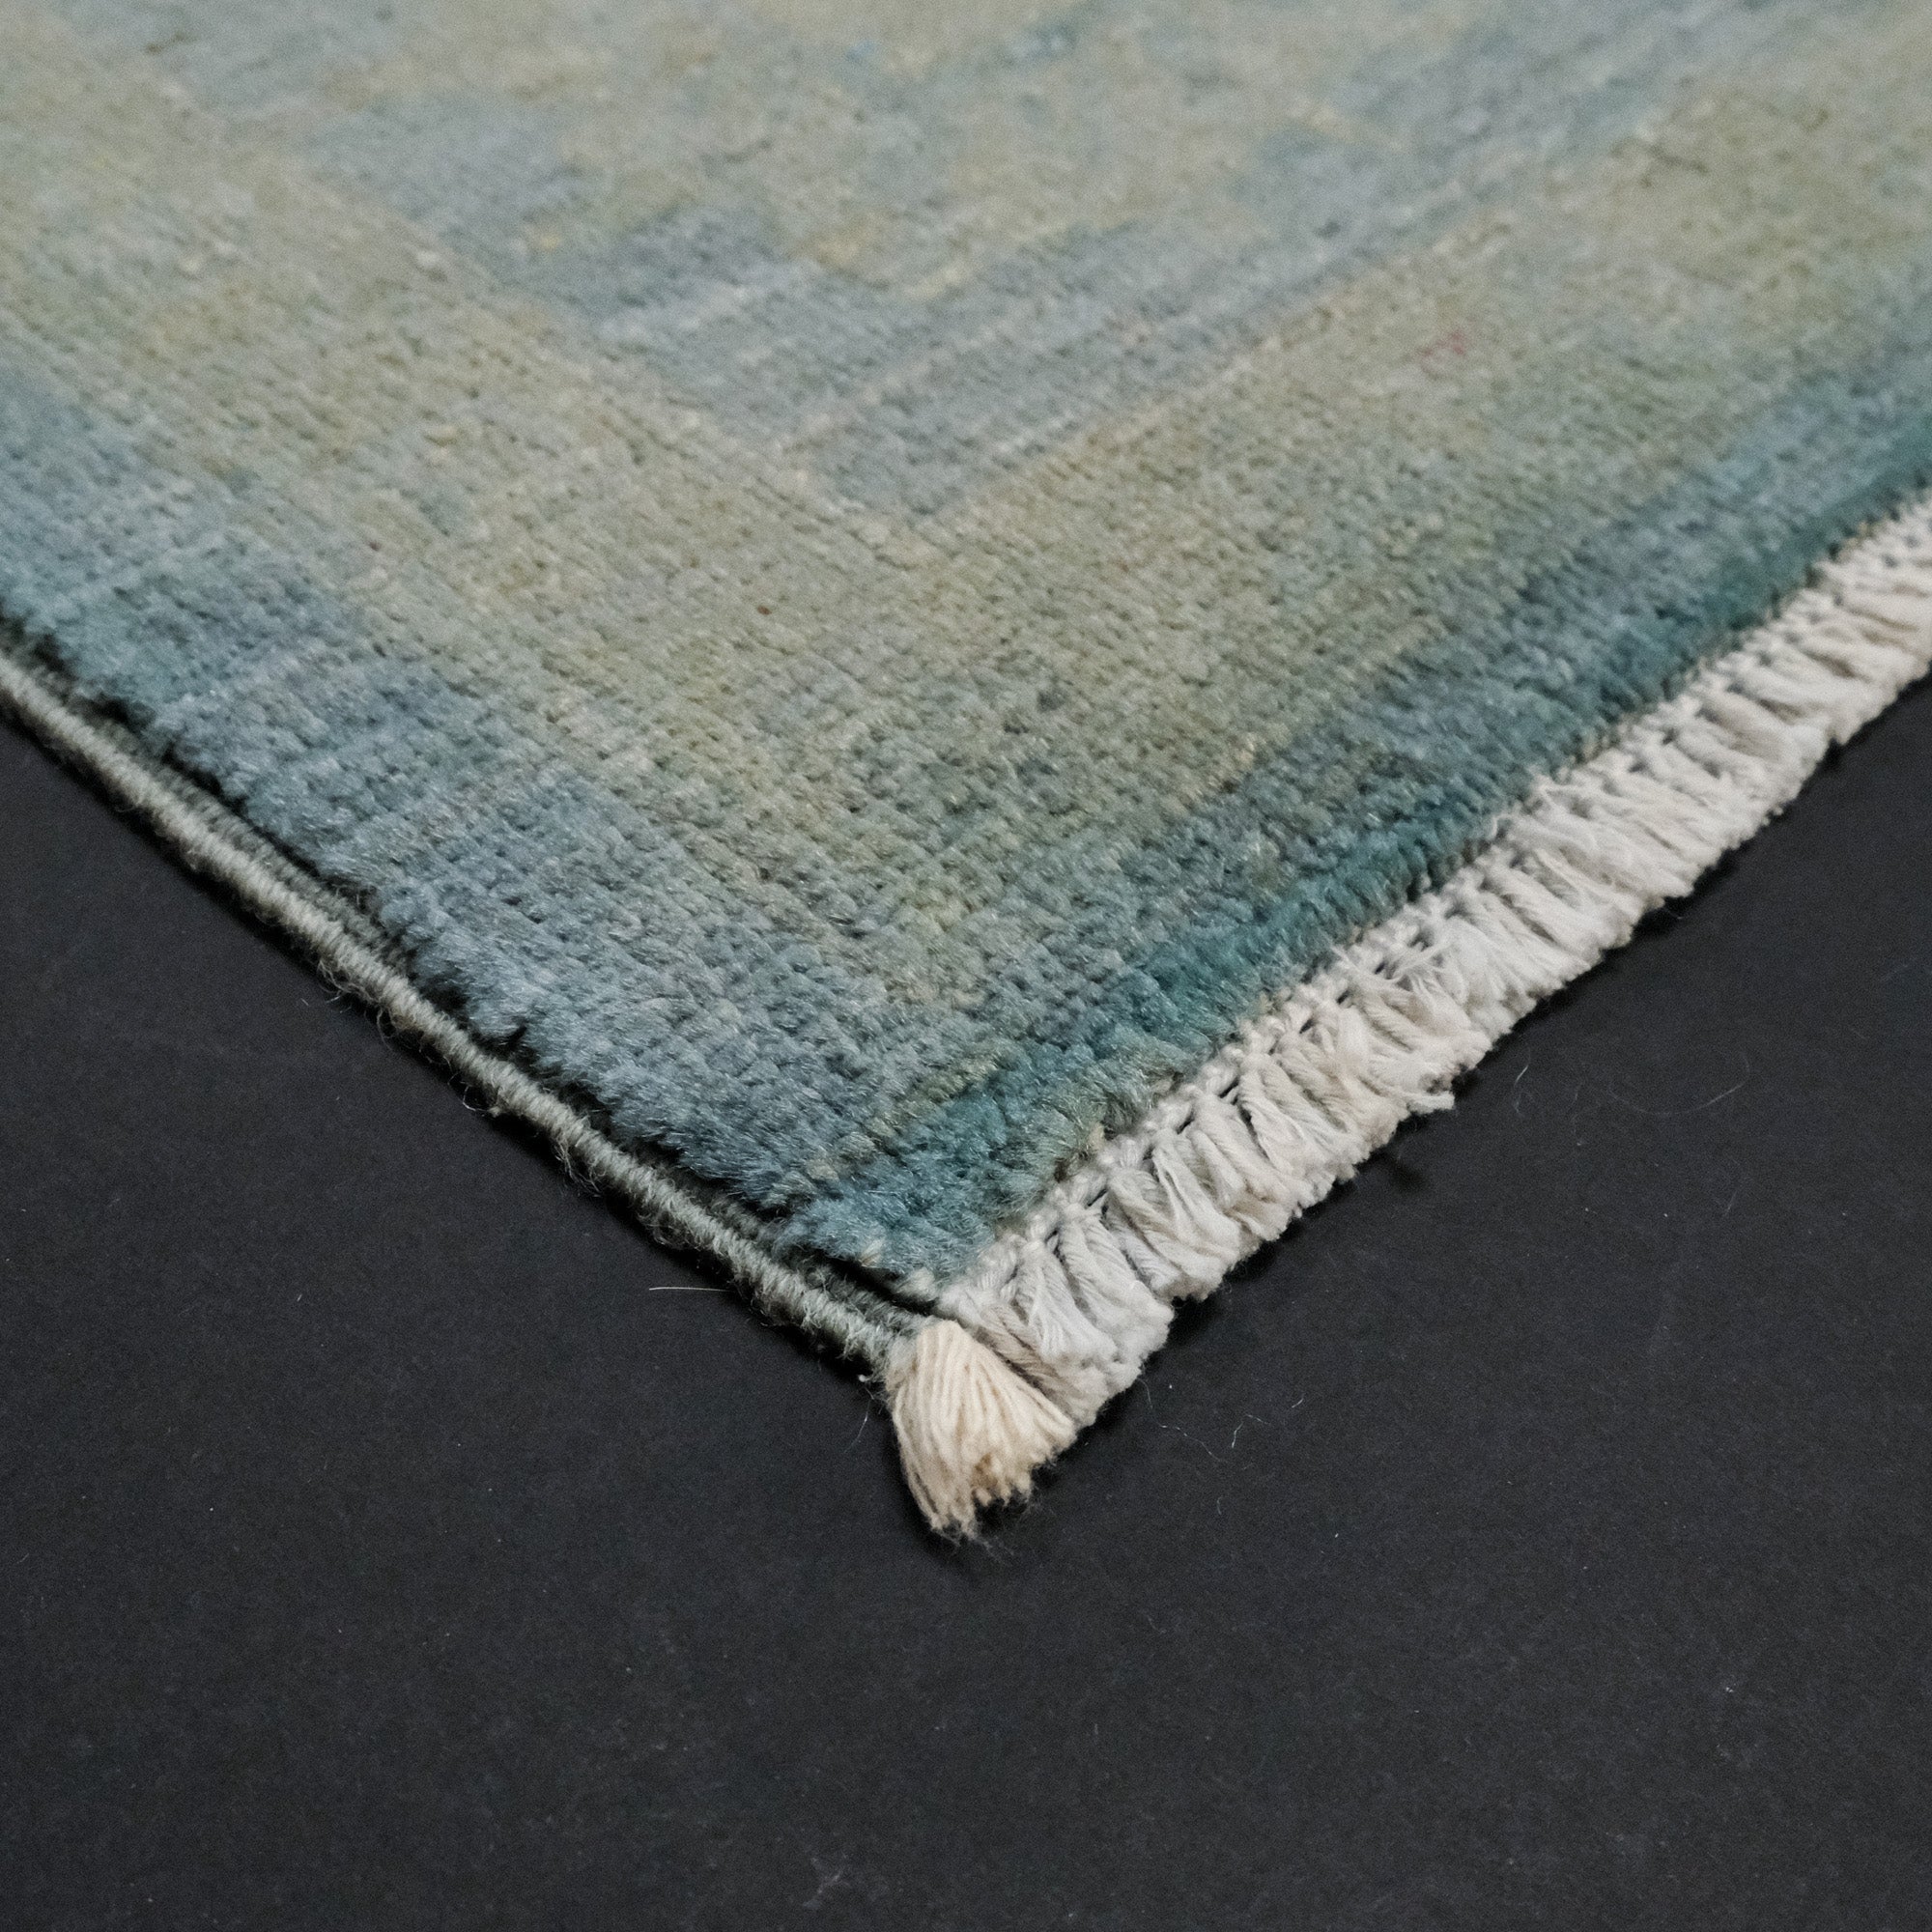 Retro Series Hand-Woven Vintage Patterned Green Wool Carpet